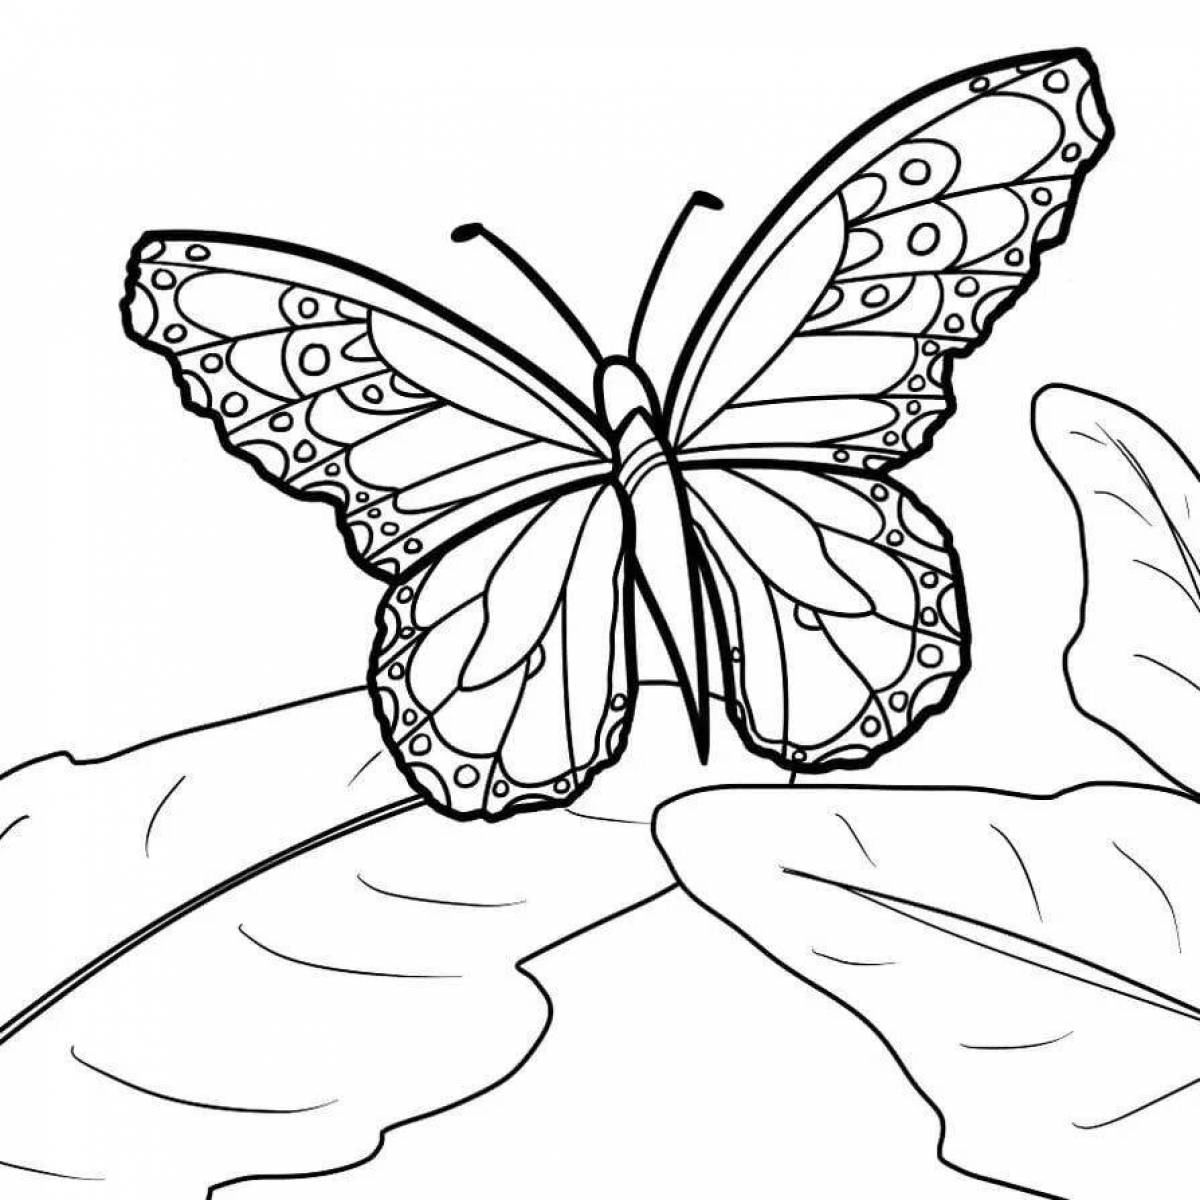 Adorable photo coloring pages